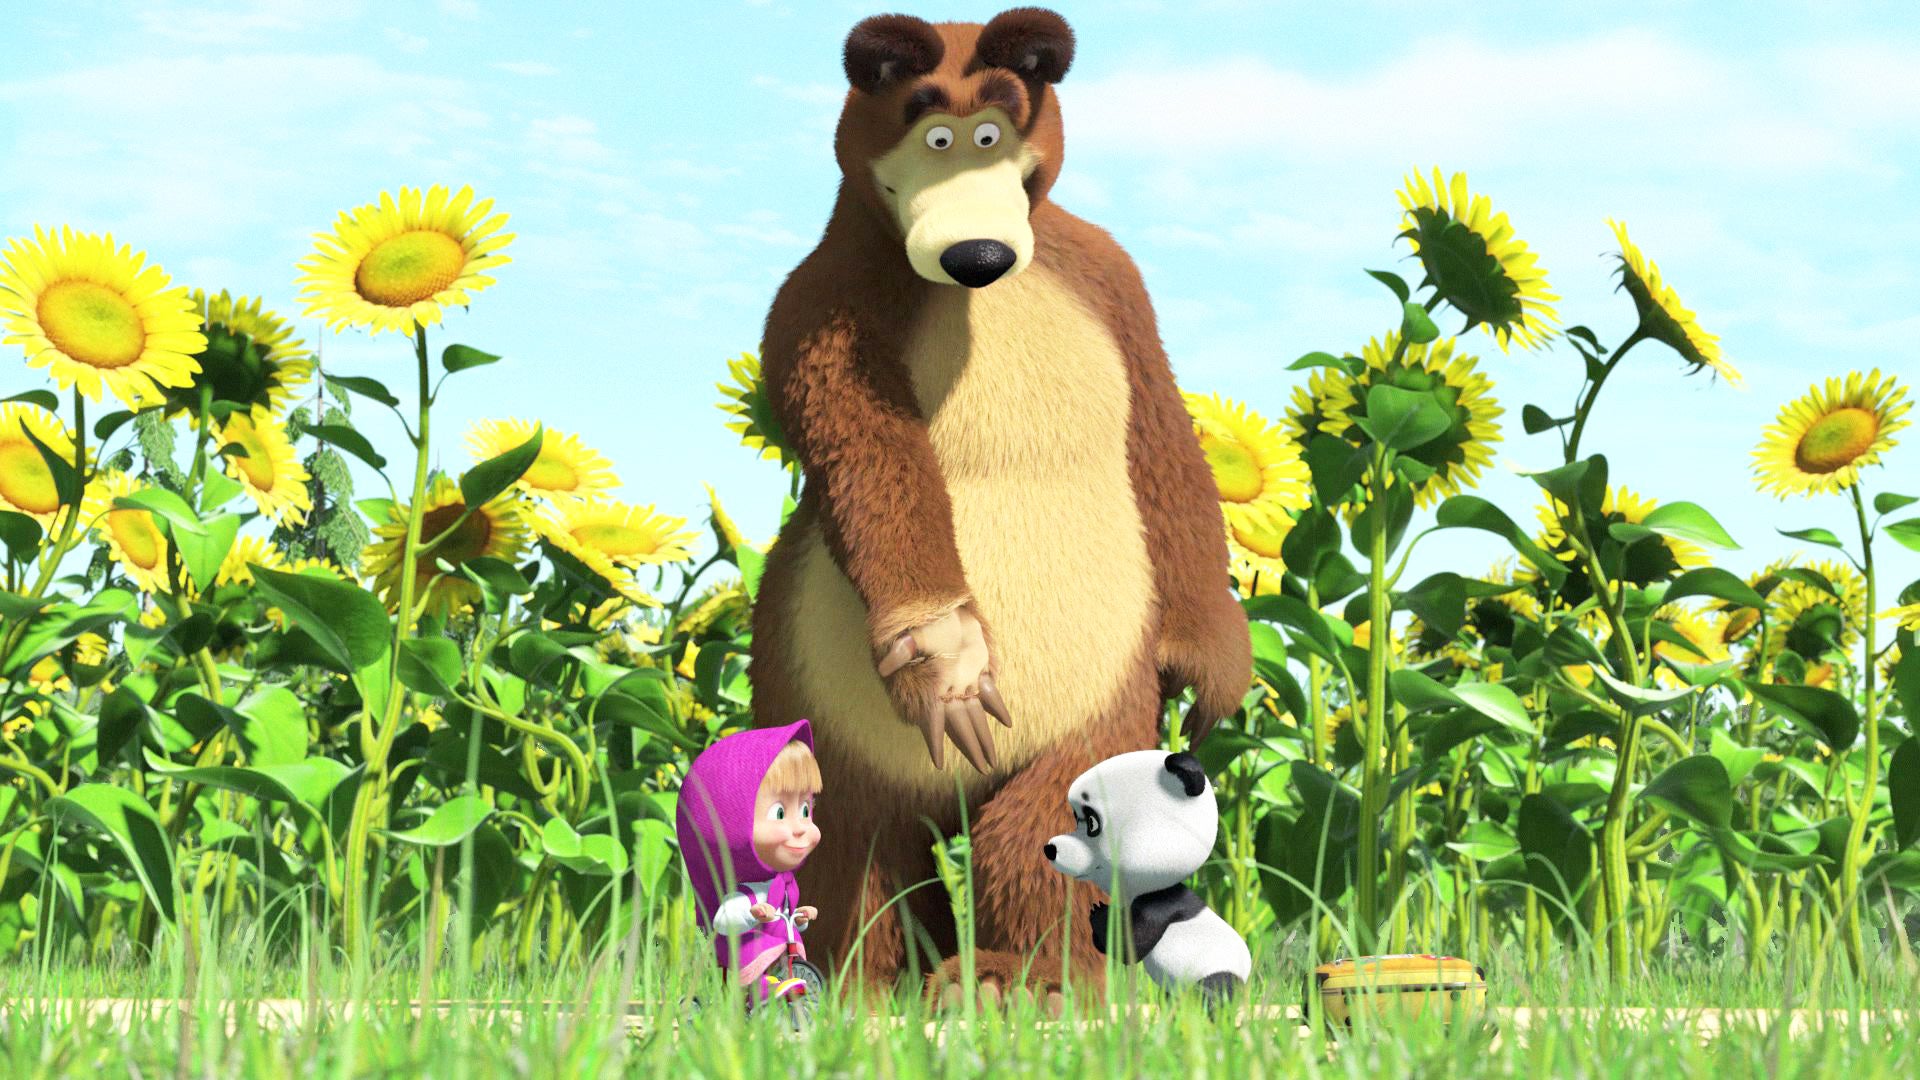 Watch Masha And The Bear Season 1 Episode 15 Little Cousin Watch Full Episode Onlinehd On 